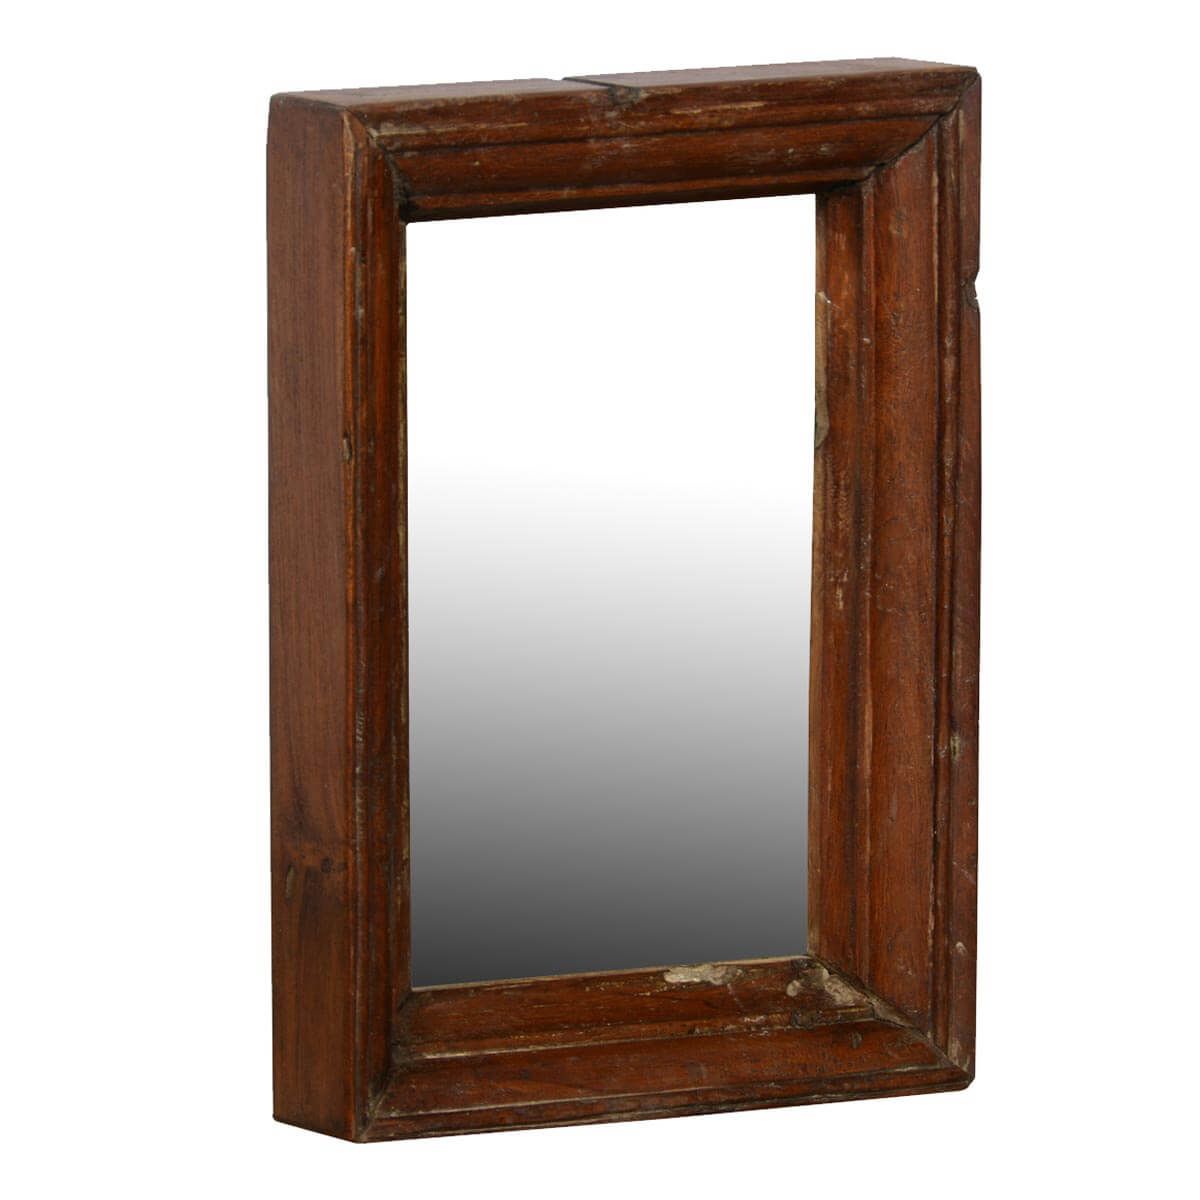 Rustic Farmhouse Reclaimed Wood Handmade Wall Mirror Frame With Iron Frame Handcrafted Wall Mirrors (View 2 of 15)